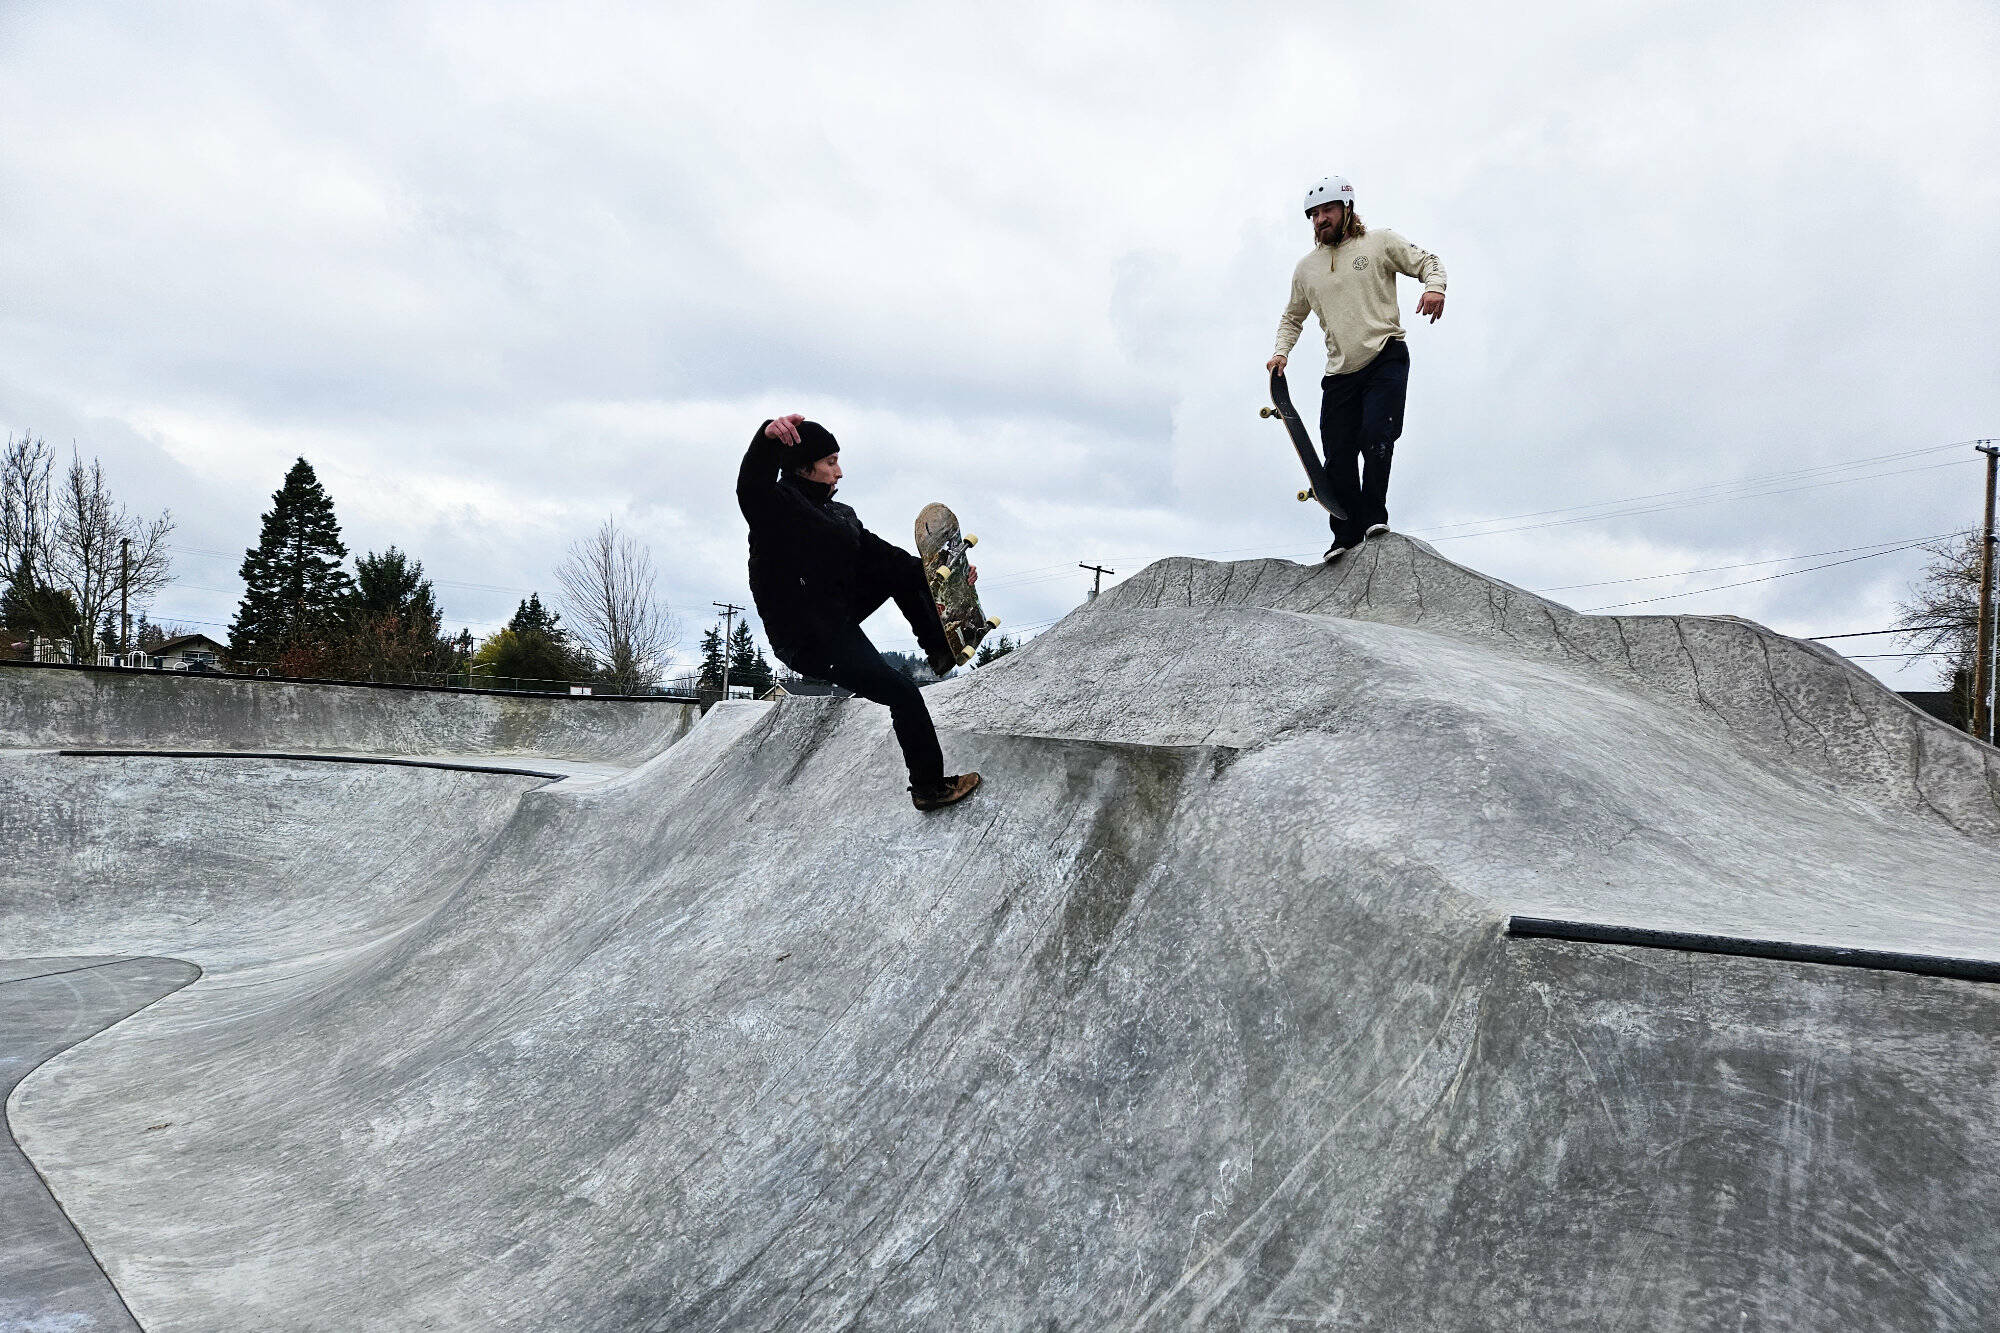 Kasey Craft, in the white, and Joseff Kushmaul, in black, were two of the first people to get rolling on Enumclaw’s new skatepark. Photo by Ray Miller-Still